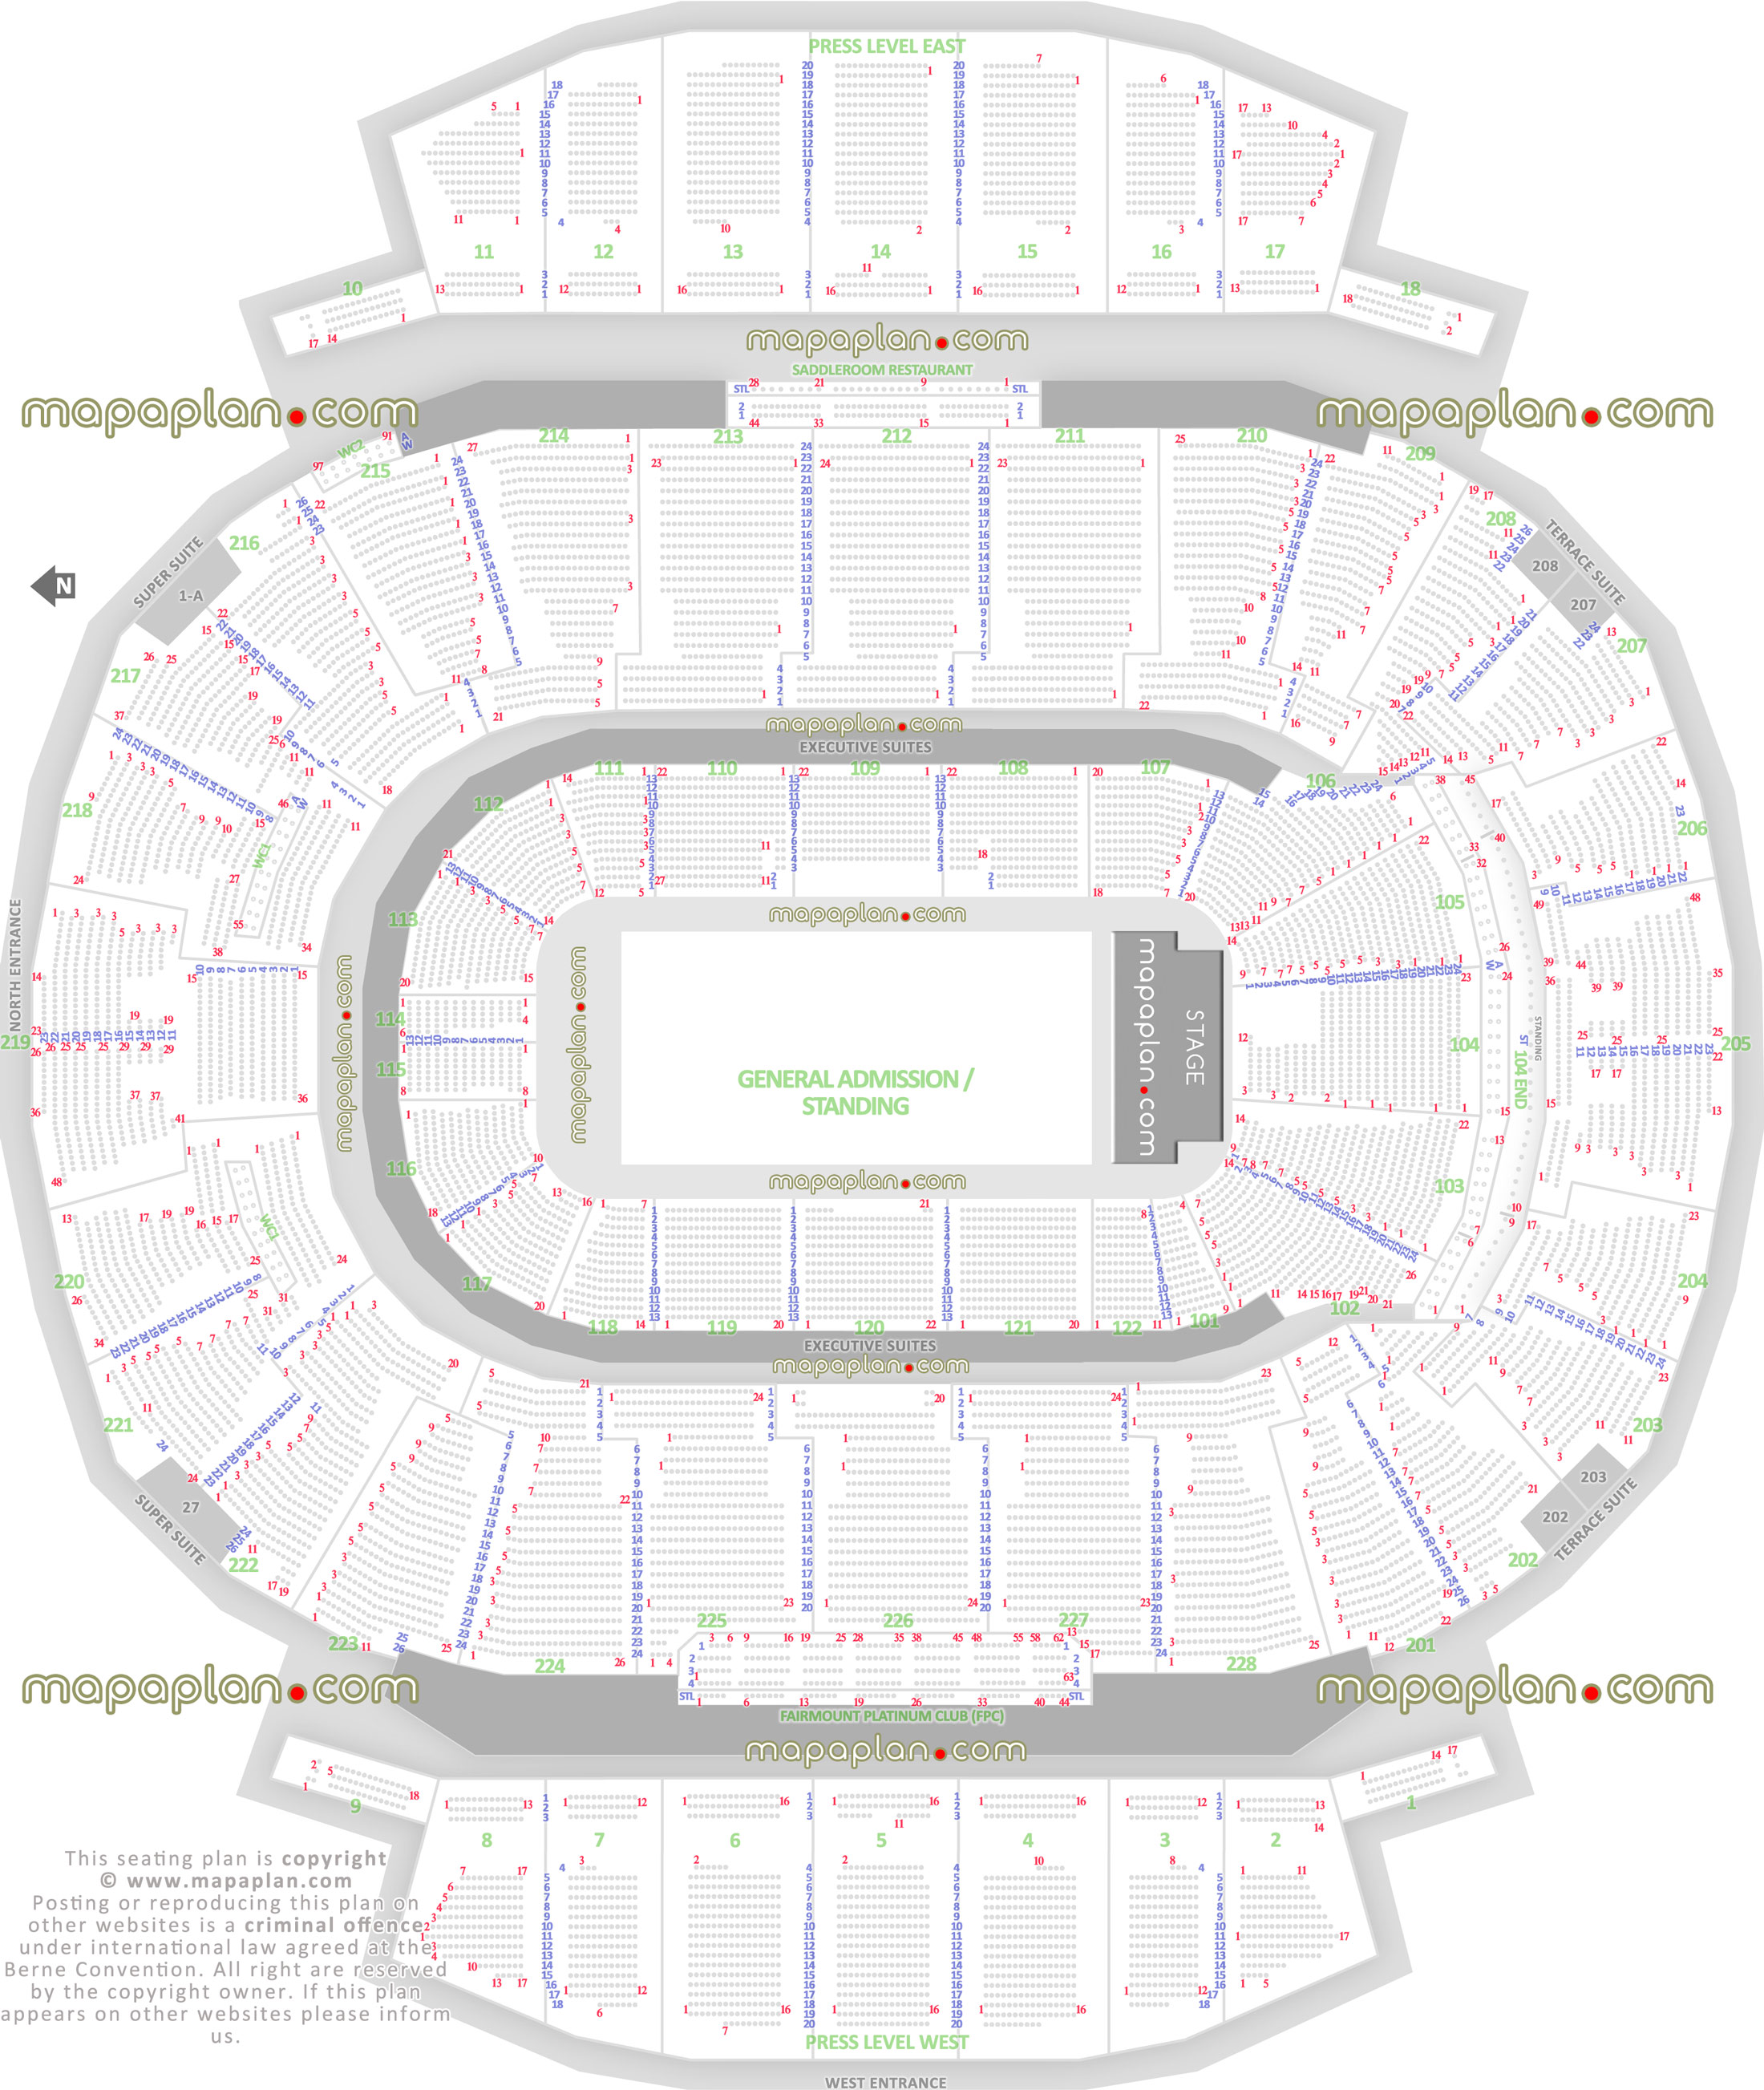 general admission ga floor standing concert capacity 3d plan olympic saddledome ab concert stage detailed floor pit plan sections best seat numbers selection information guide virtual interactive image map rows 1 2 3 4 5 6 7 8 9 10 11 12 13 14 15 16 17 18 19 20 21 22 23 24 25 26 Calgary Scotiabank Saddledome seating chart